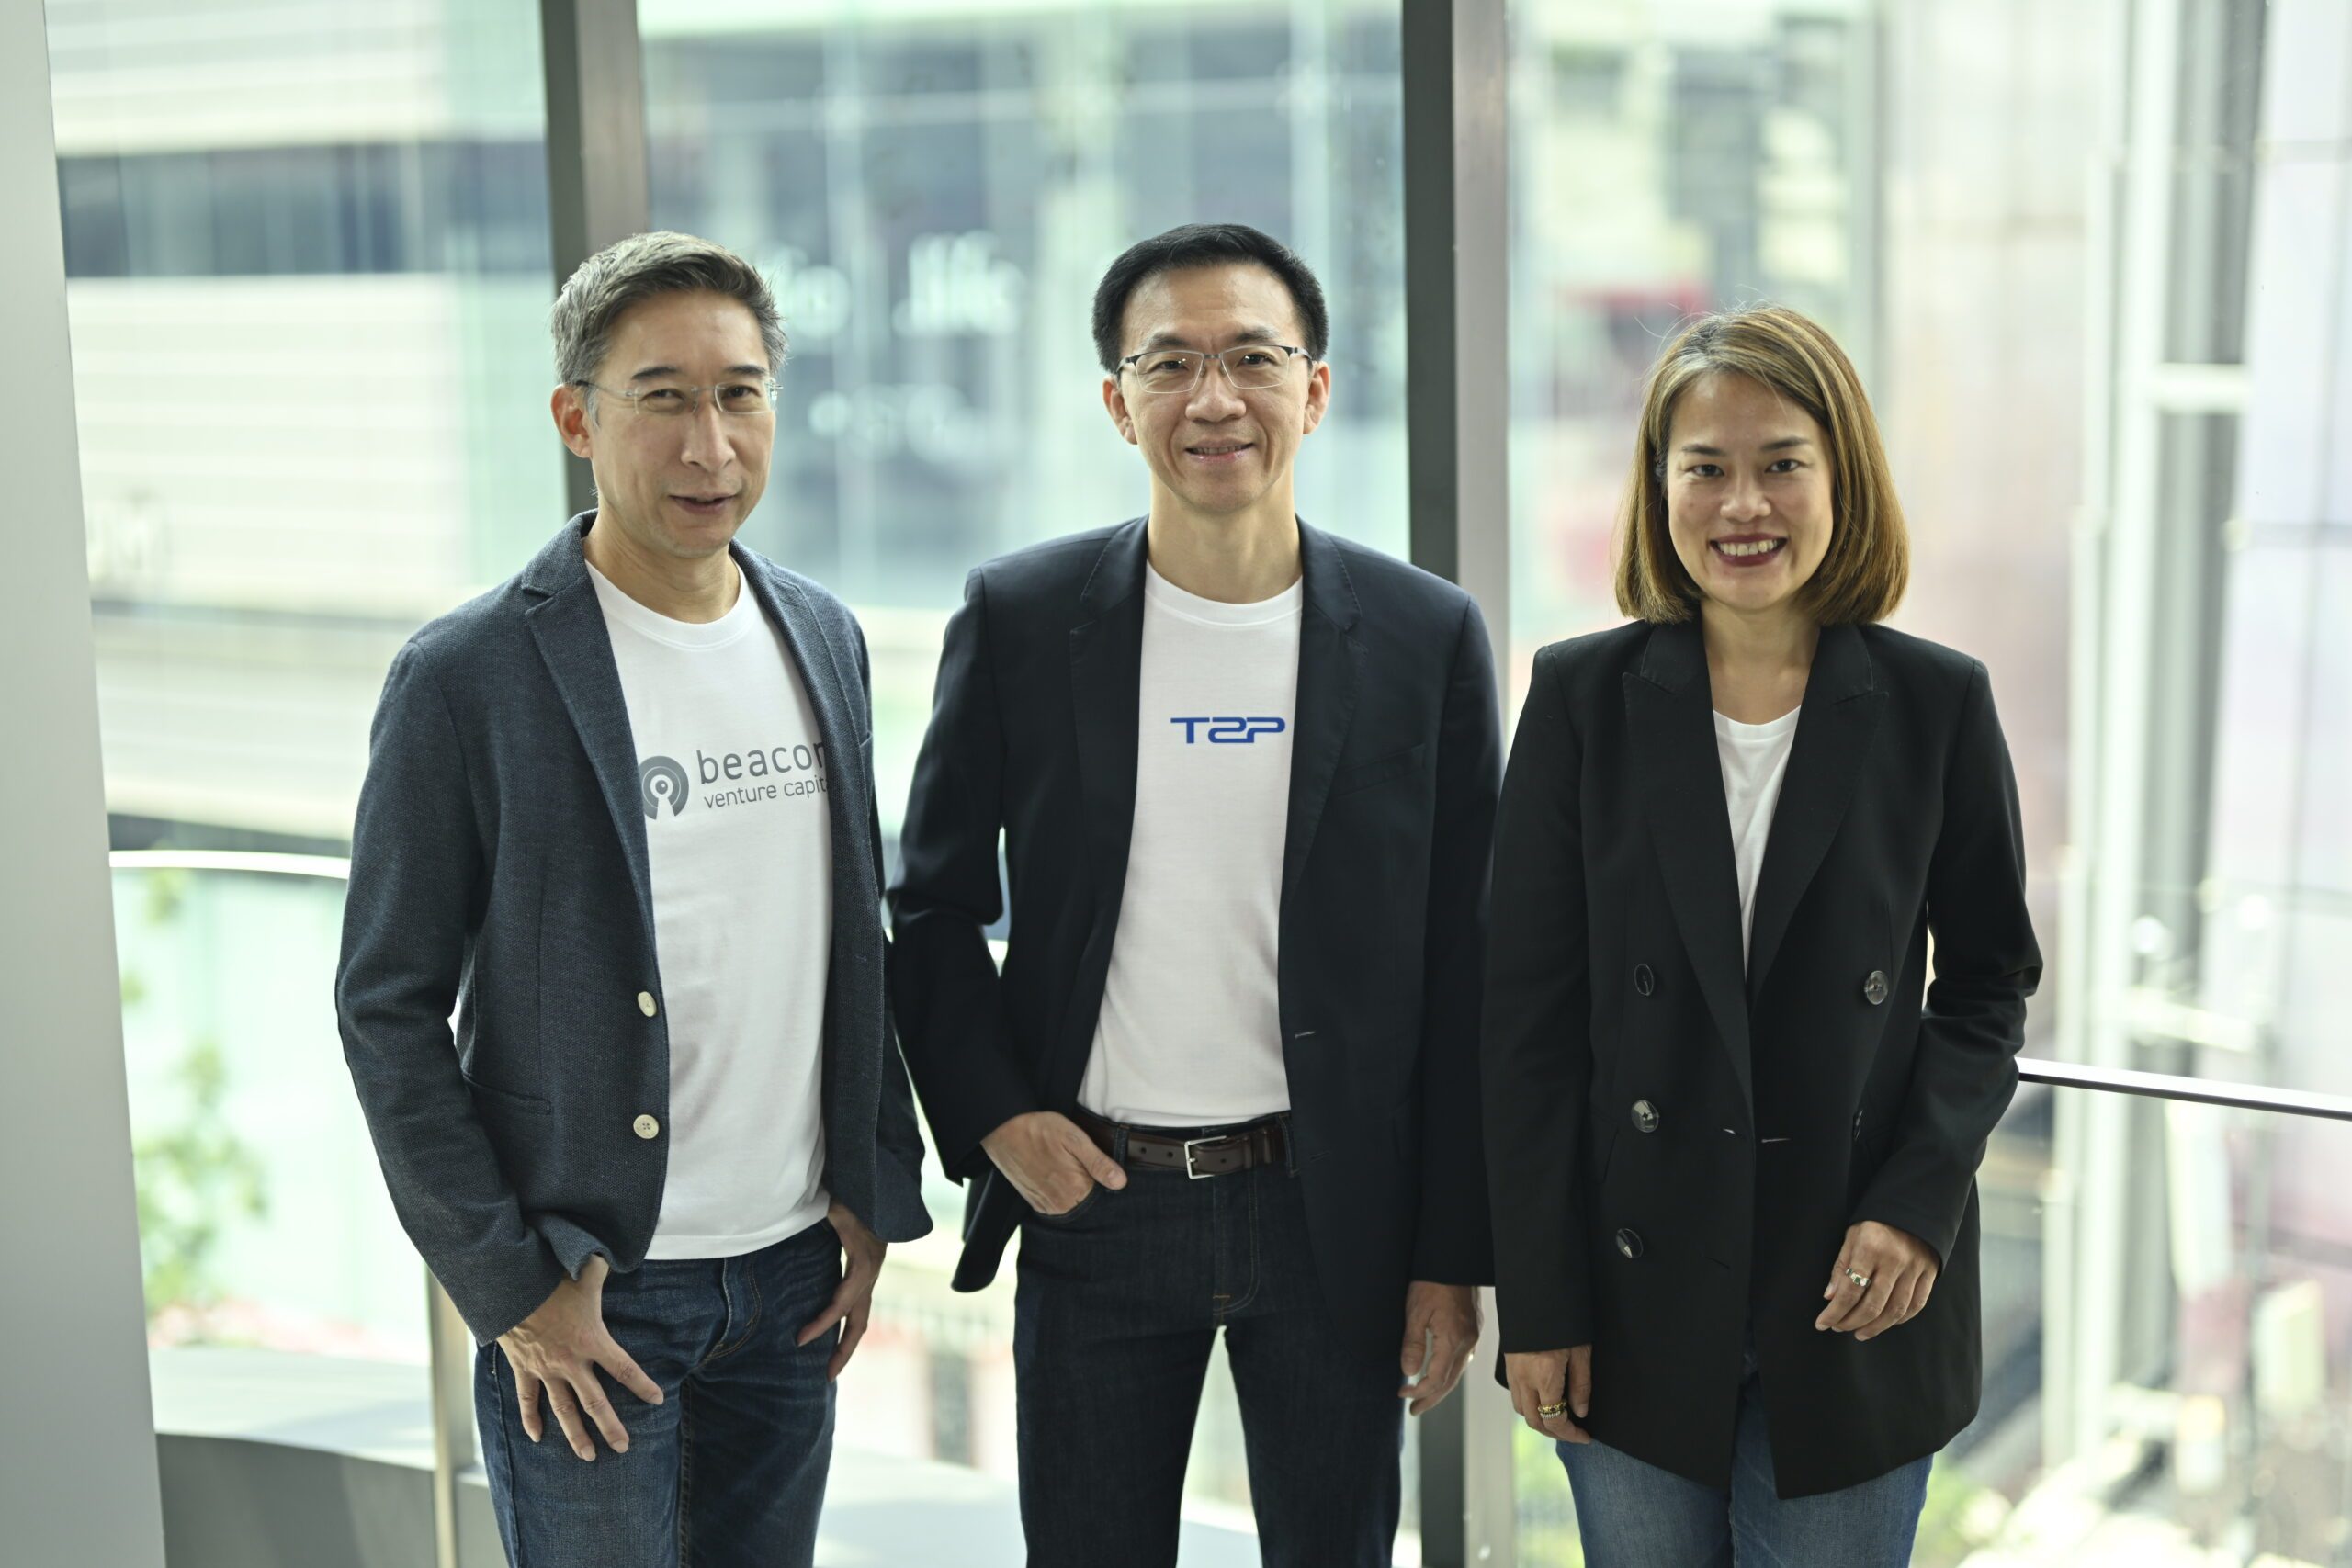 SEA Digest: Thailand's Beacon VC invests in T2P; Bridgewater opens Singapore office